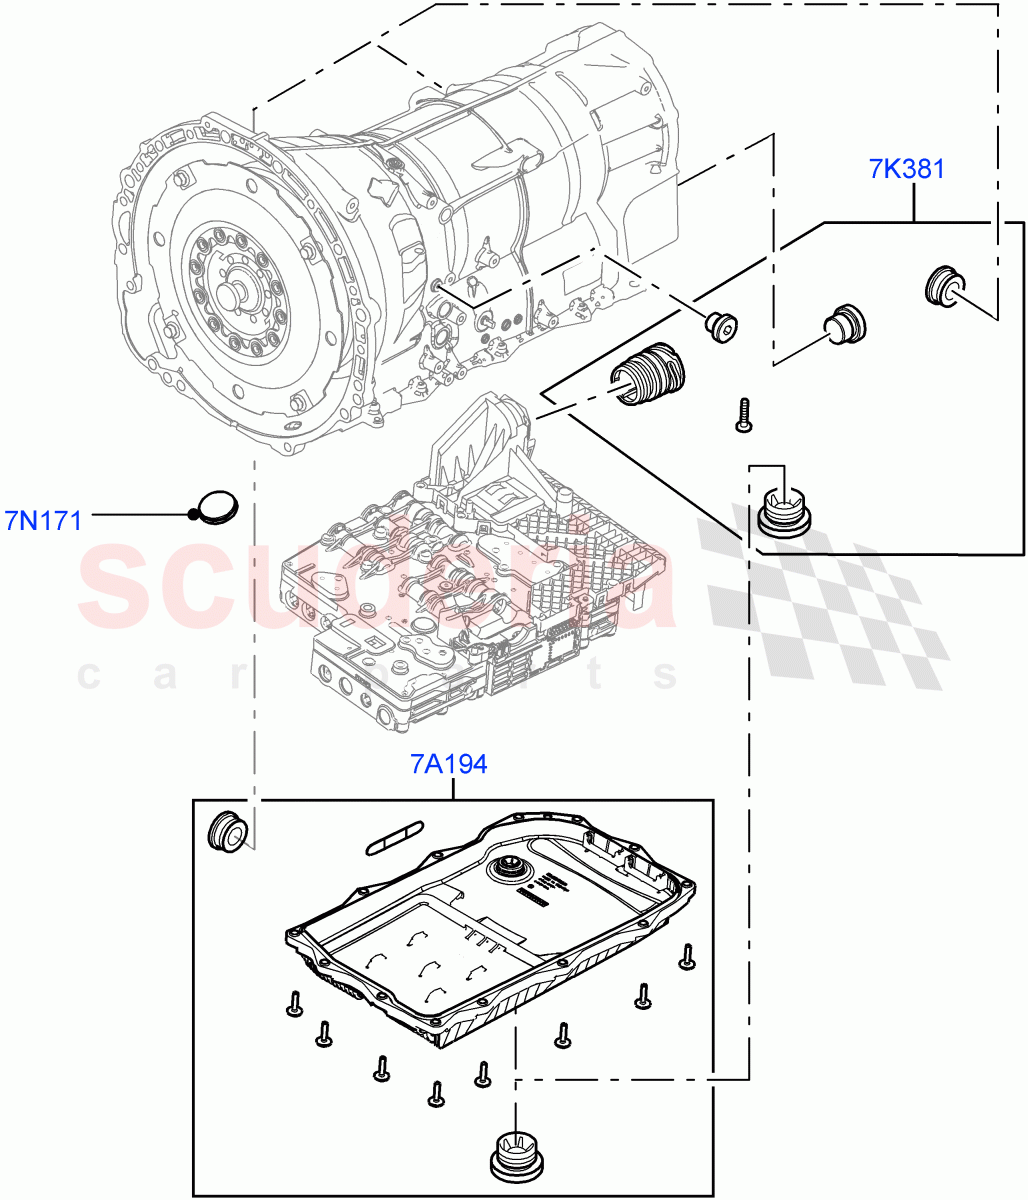 Transmission External Components(Solihull Plant Build)(2.0L I4 DSL HIGH DOHC AJ200,8 Speed Auto Trans ZF 8HP70 4WD)((V)FROMHA000001) of Land Rover Land Rover Discovery 5 (2017+) [2.0 Turbo Petrol AJ200P]